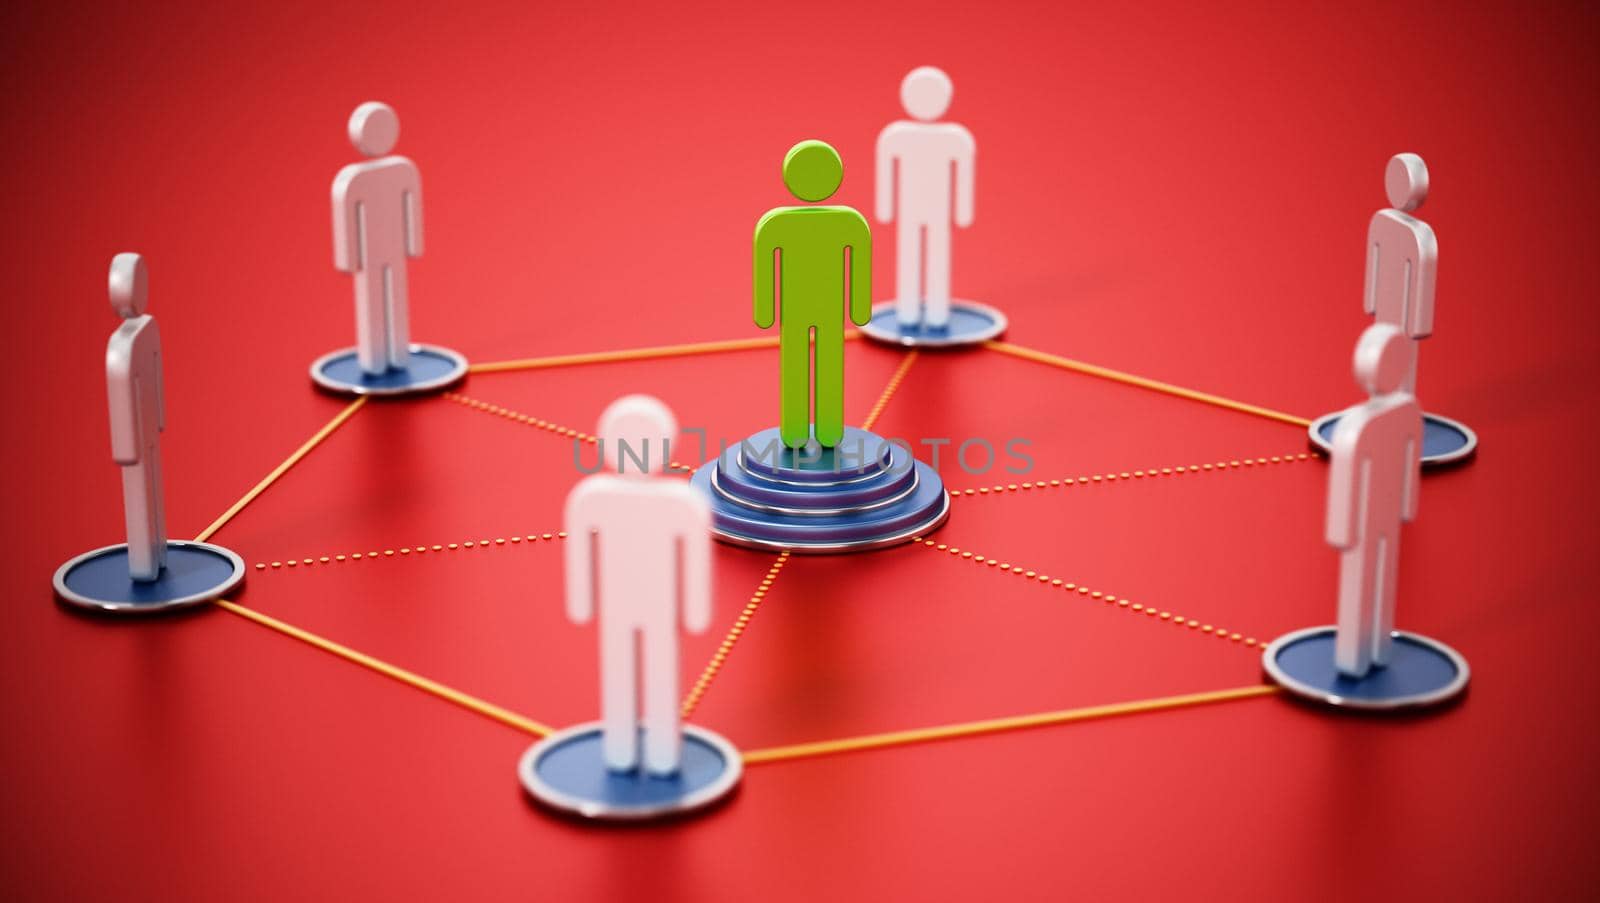 Connected people with a stand out figure at the center. 3D illustration by Simsek